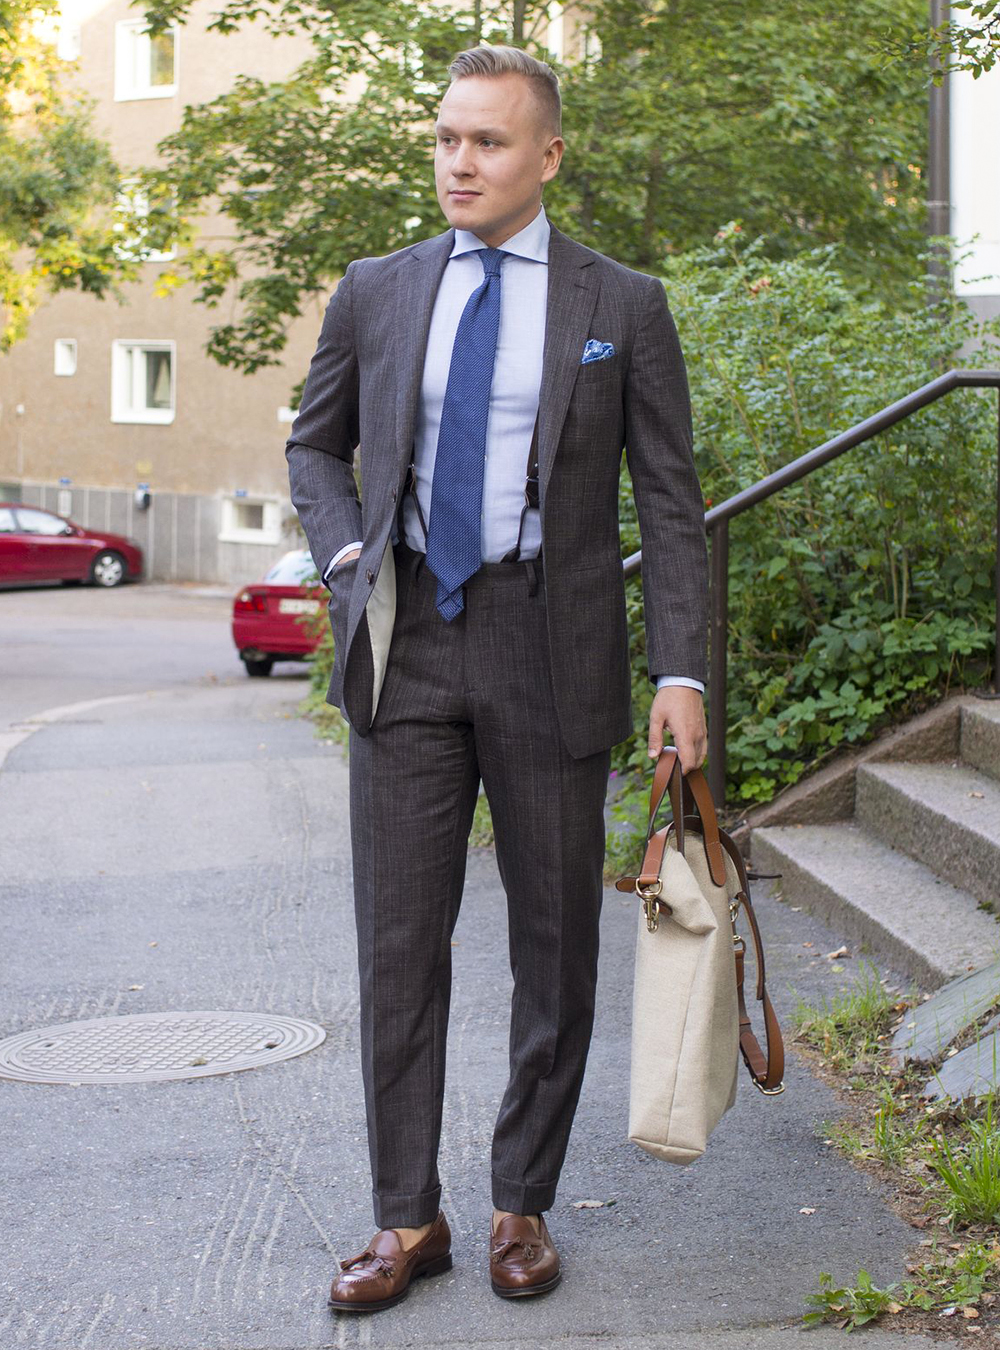 Charcoal suit, light blue dress shirt, blue tie and dark brown loafers